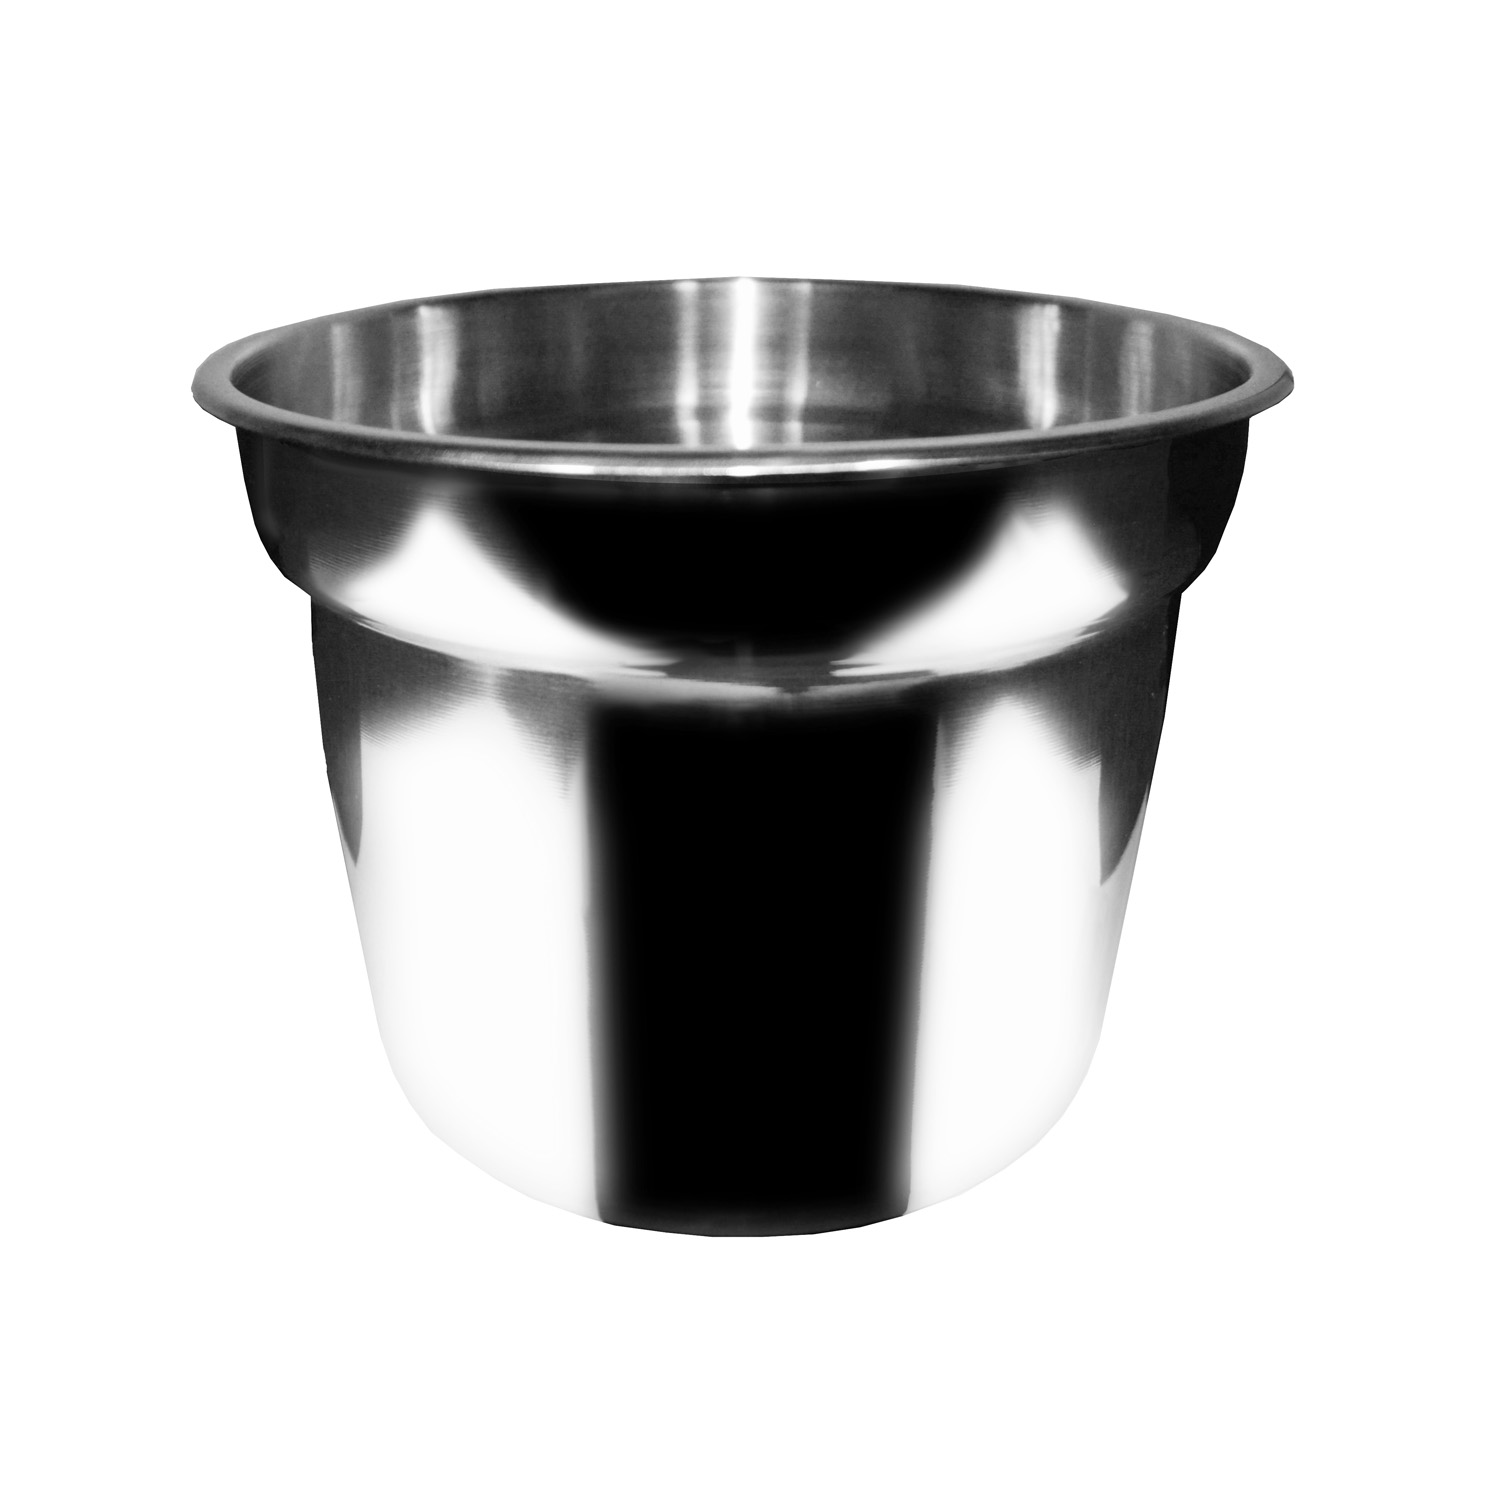 CAC China INSS-110F Stainless Steel Vegetable Inset Pot 11 Qt.